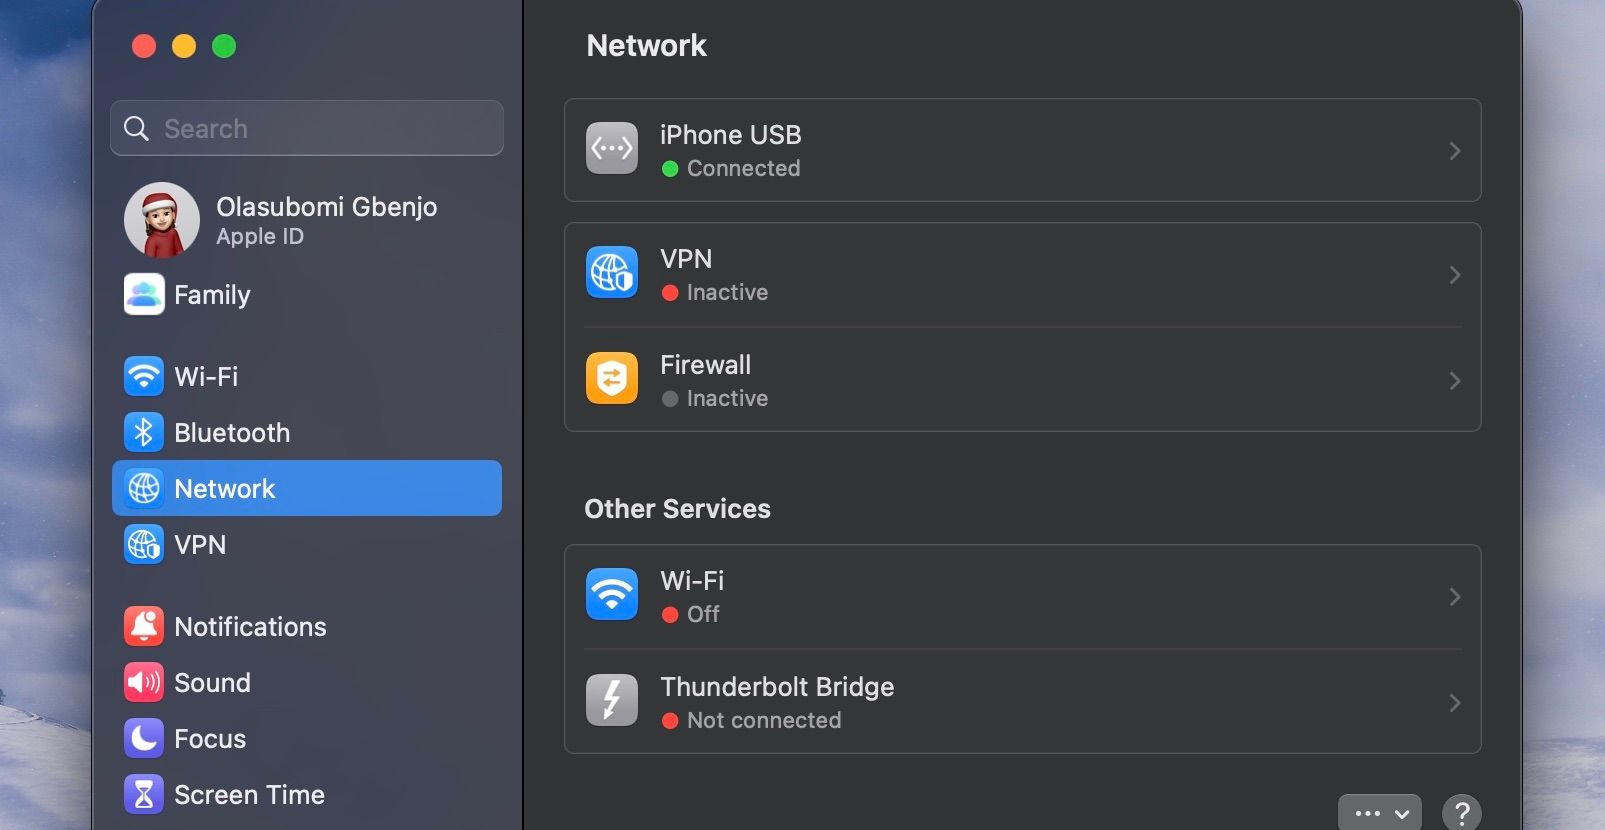 A screenshot of the iPhone USB section in Network Settings